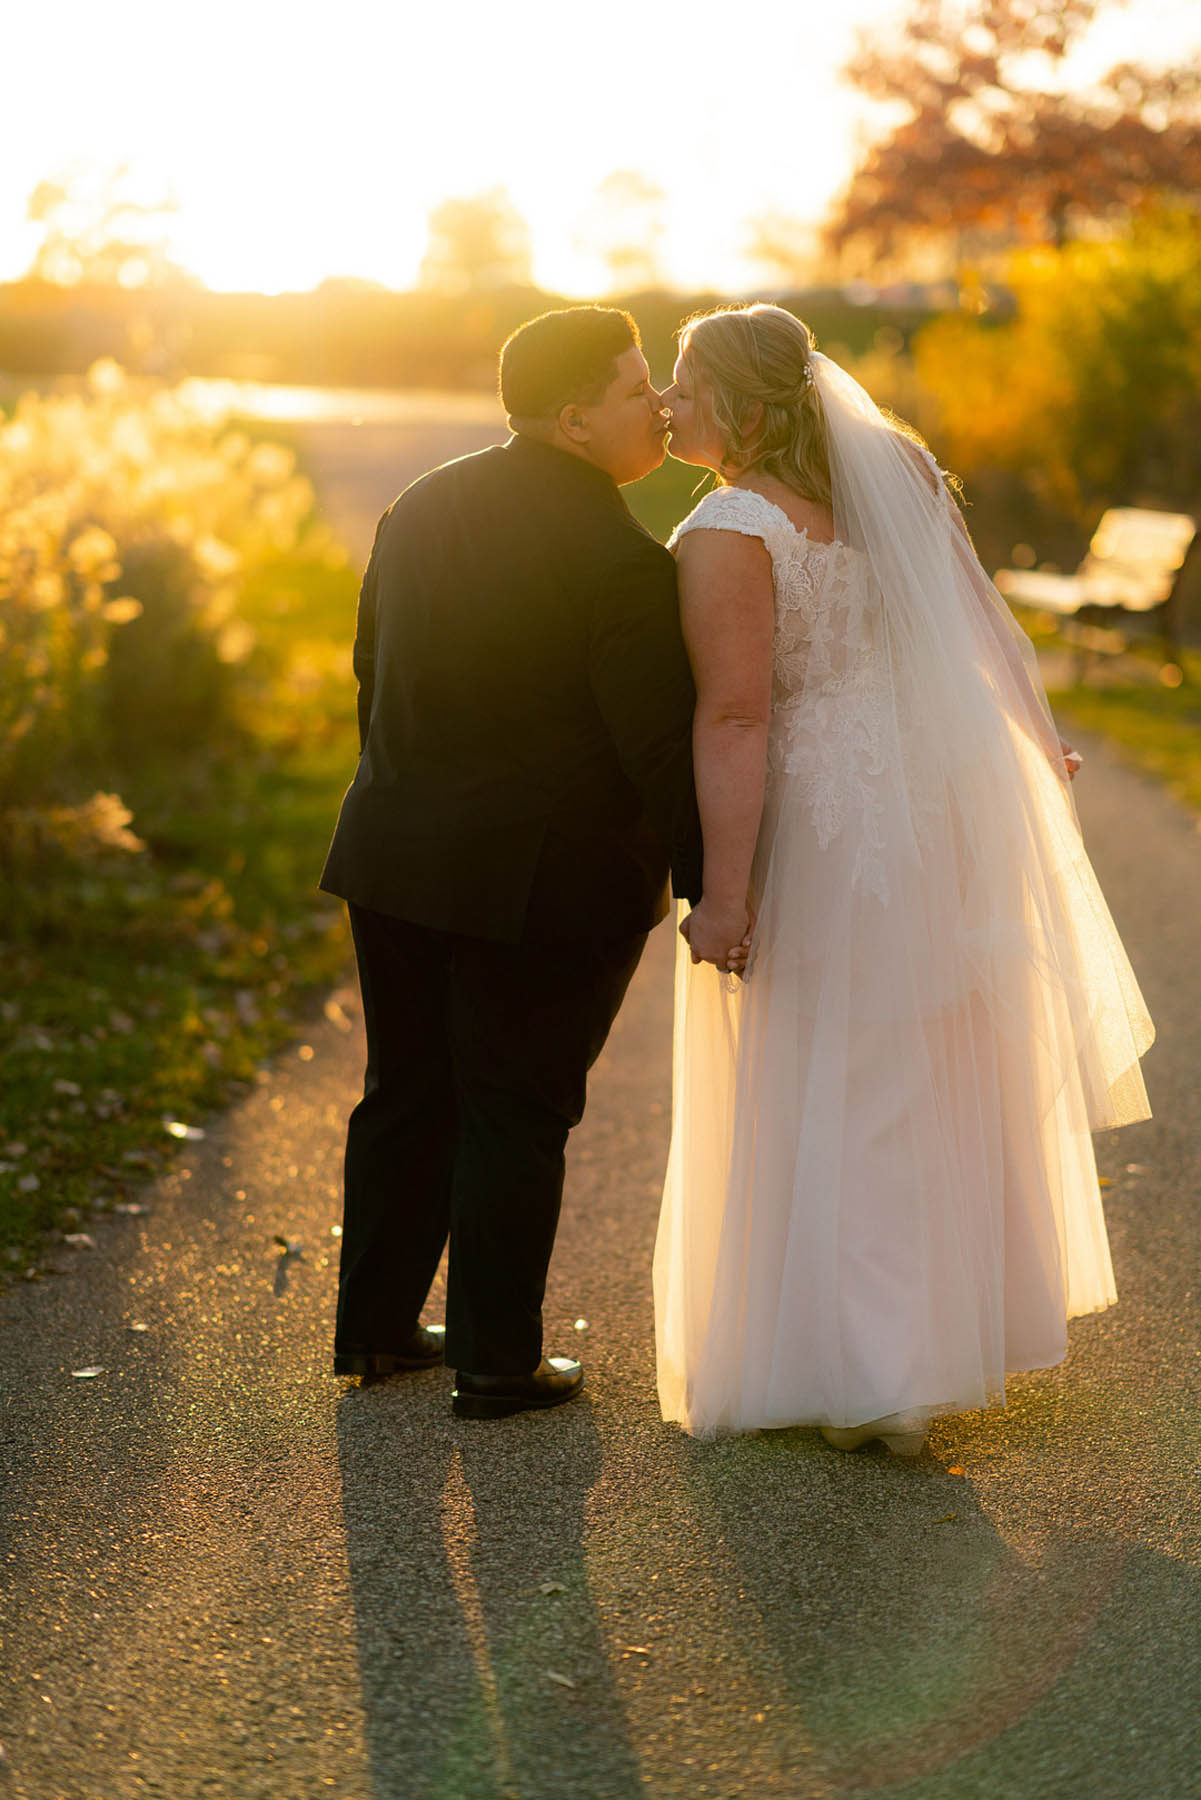 Two brides, one white in a white gown and one black in a black suit, share a kiss on an outdoor path with fall foliage in the background.